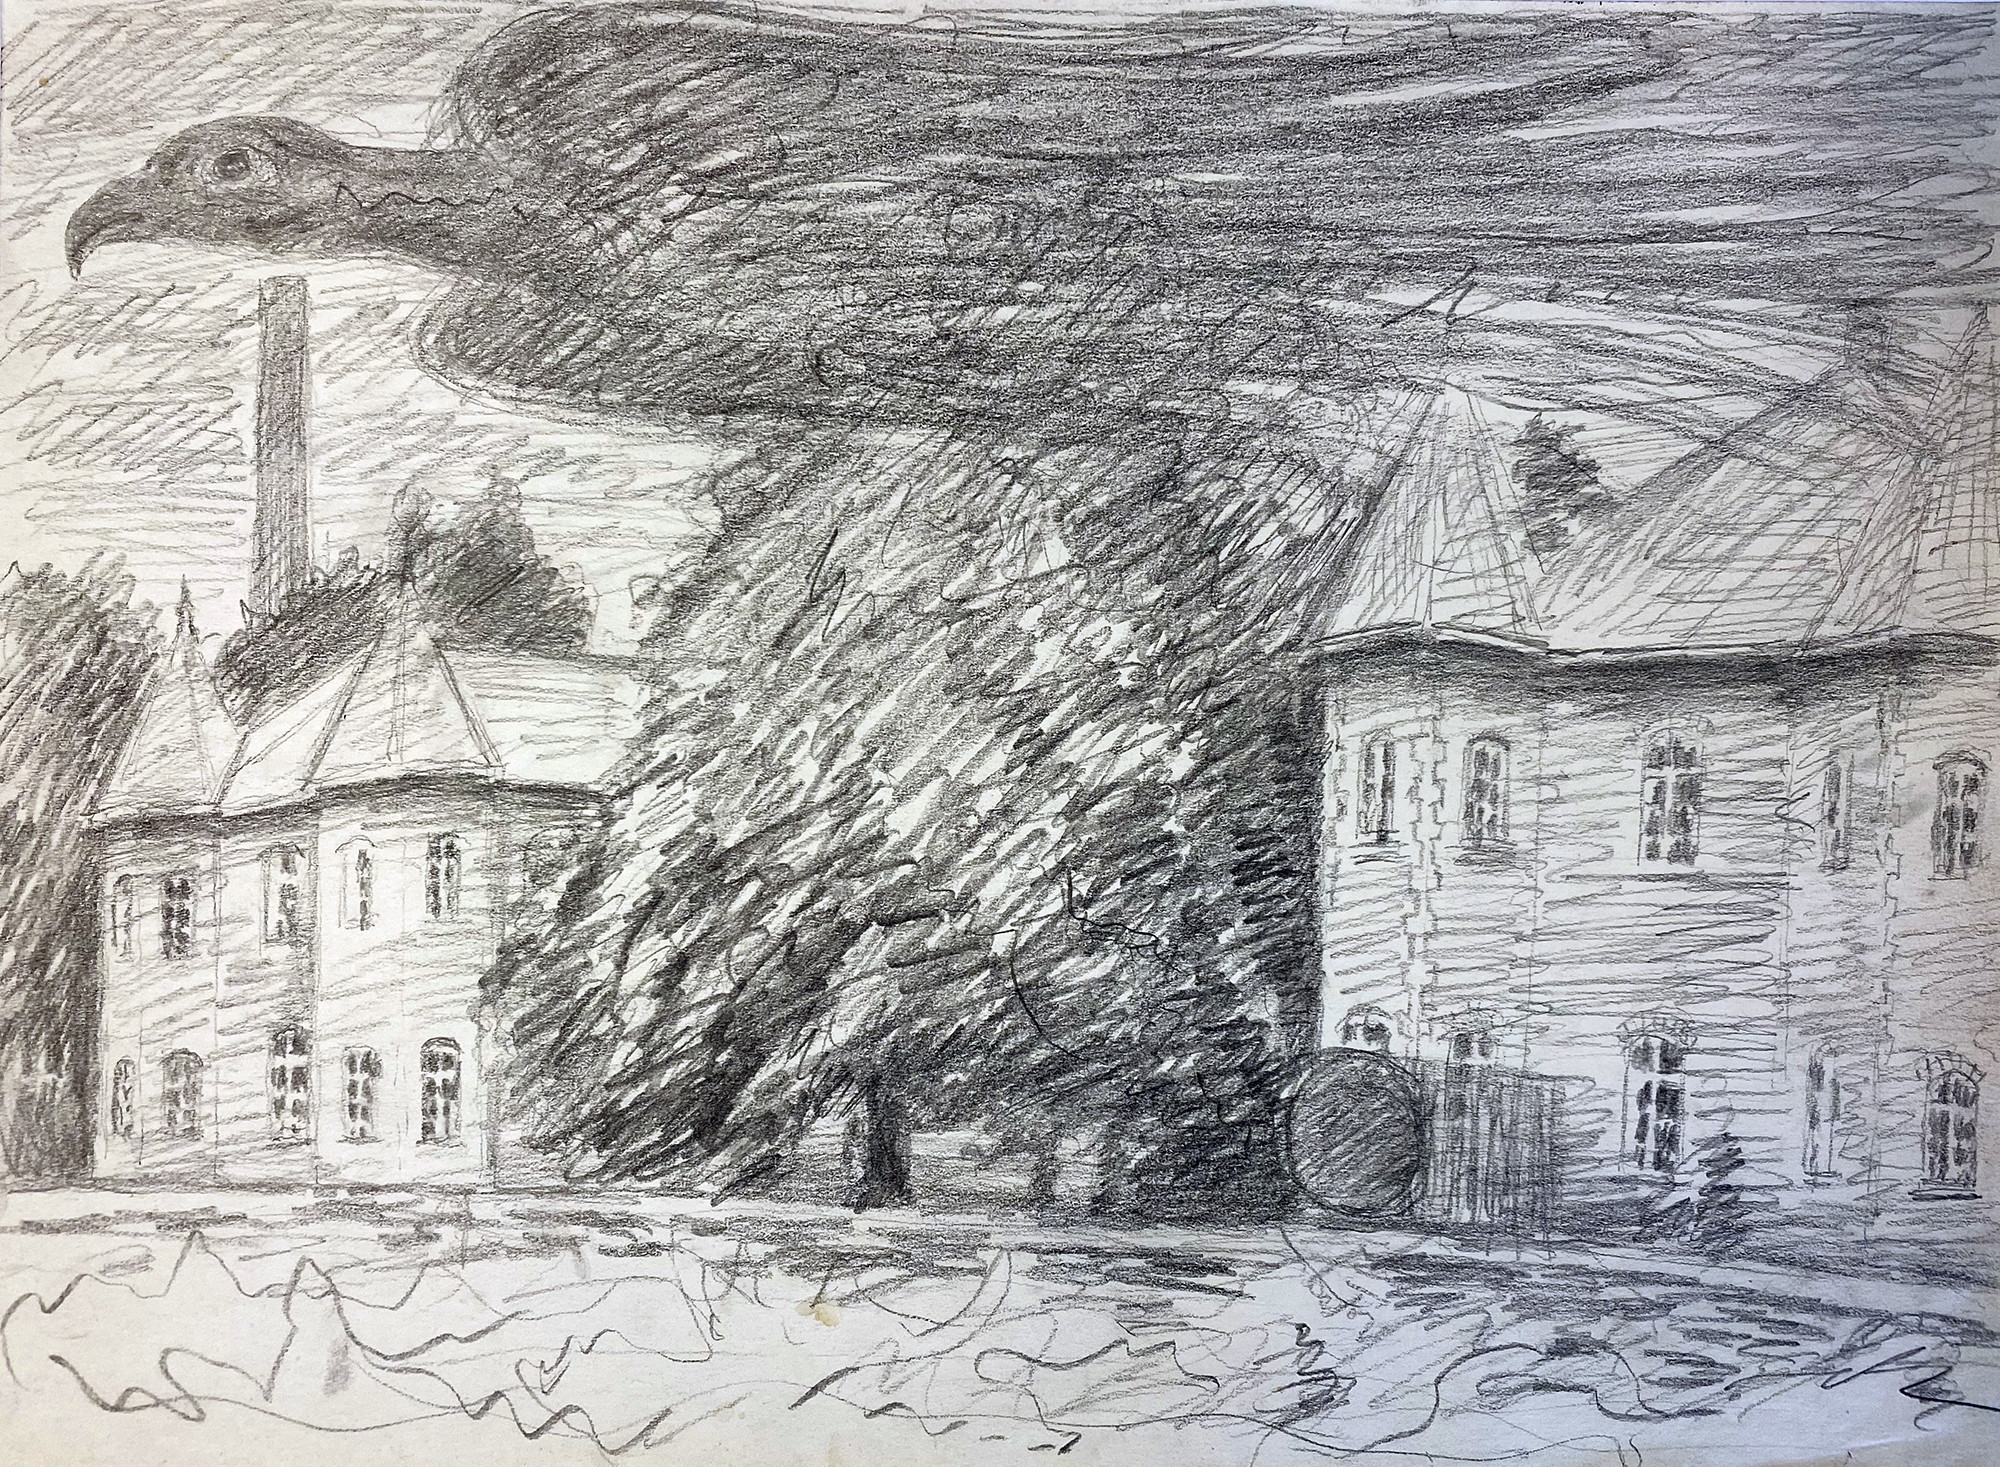 Drawing of black bird who casts shadows over the mental institution.